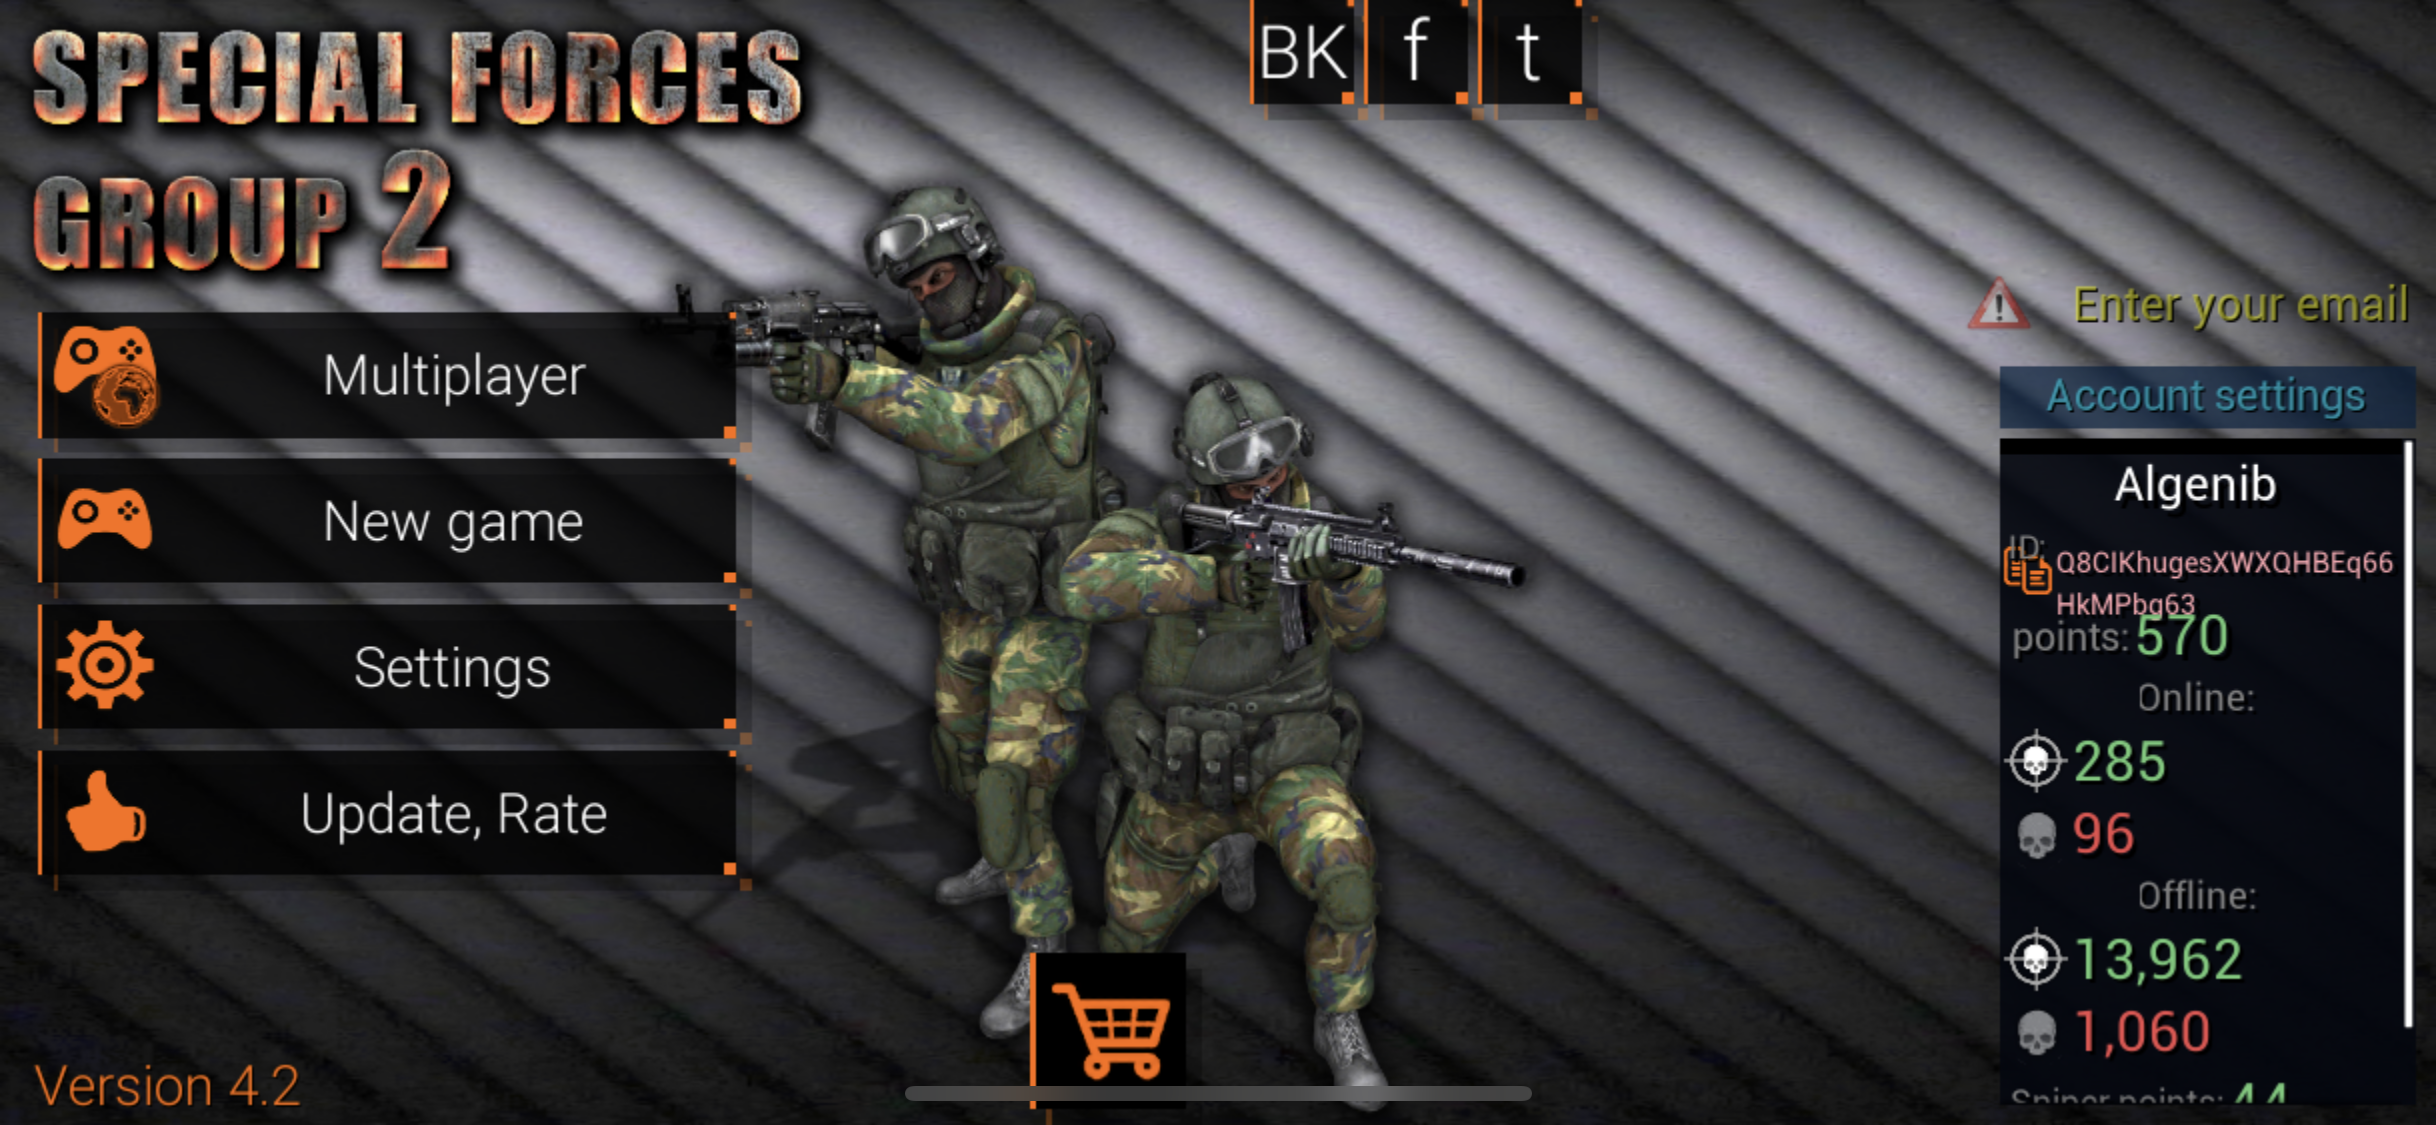 Special Forces Group 2 играть. Special Forces Group 2 скины. СФГ 2 читы. Special forces group играть